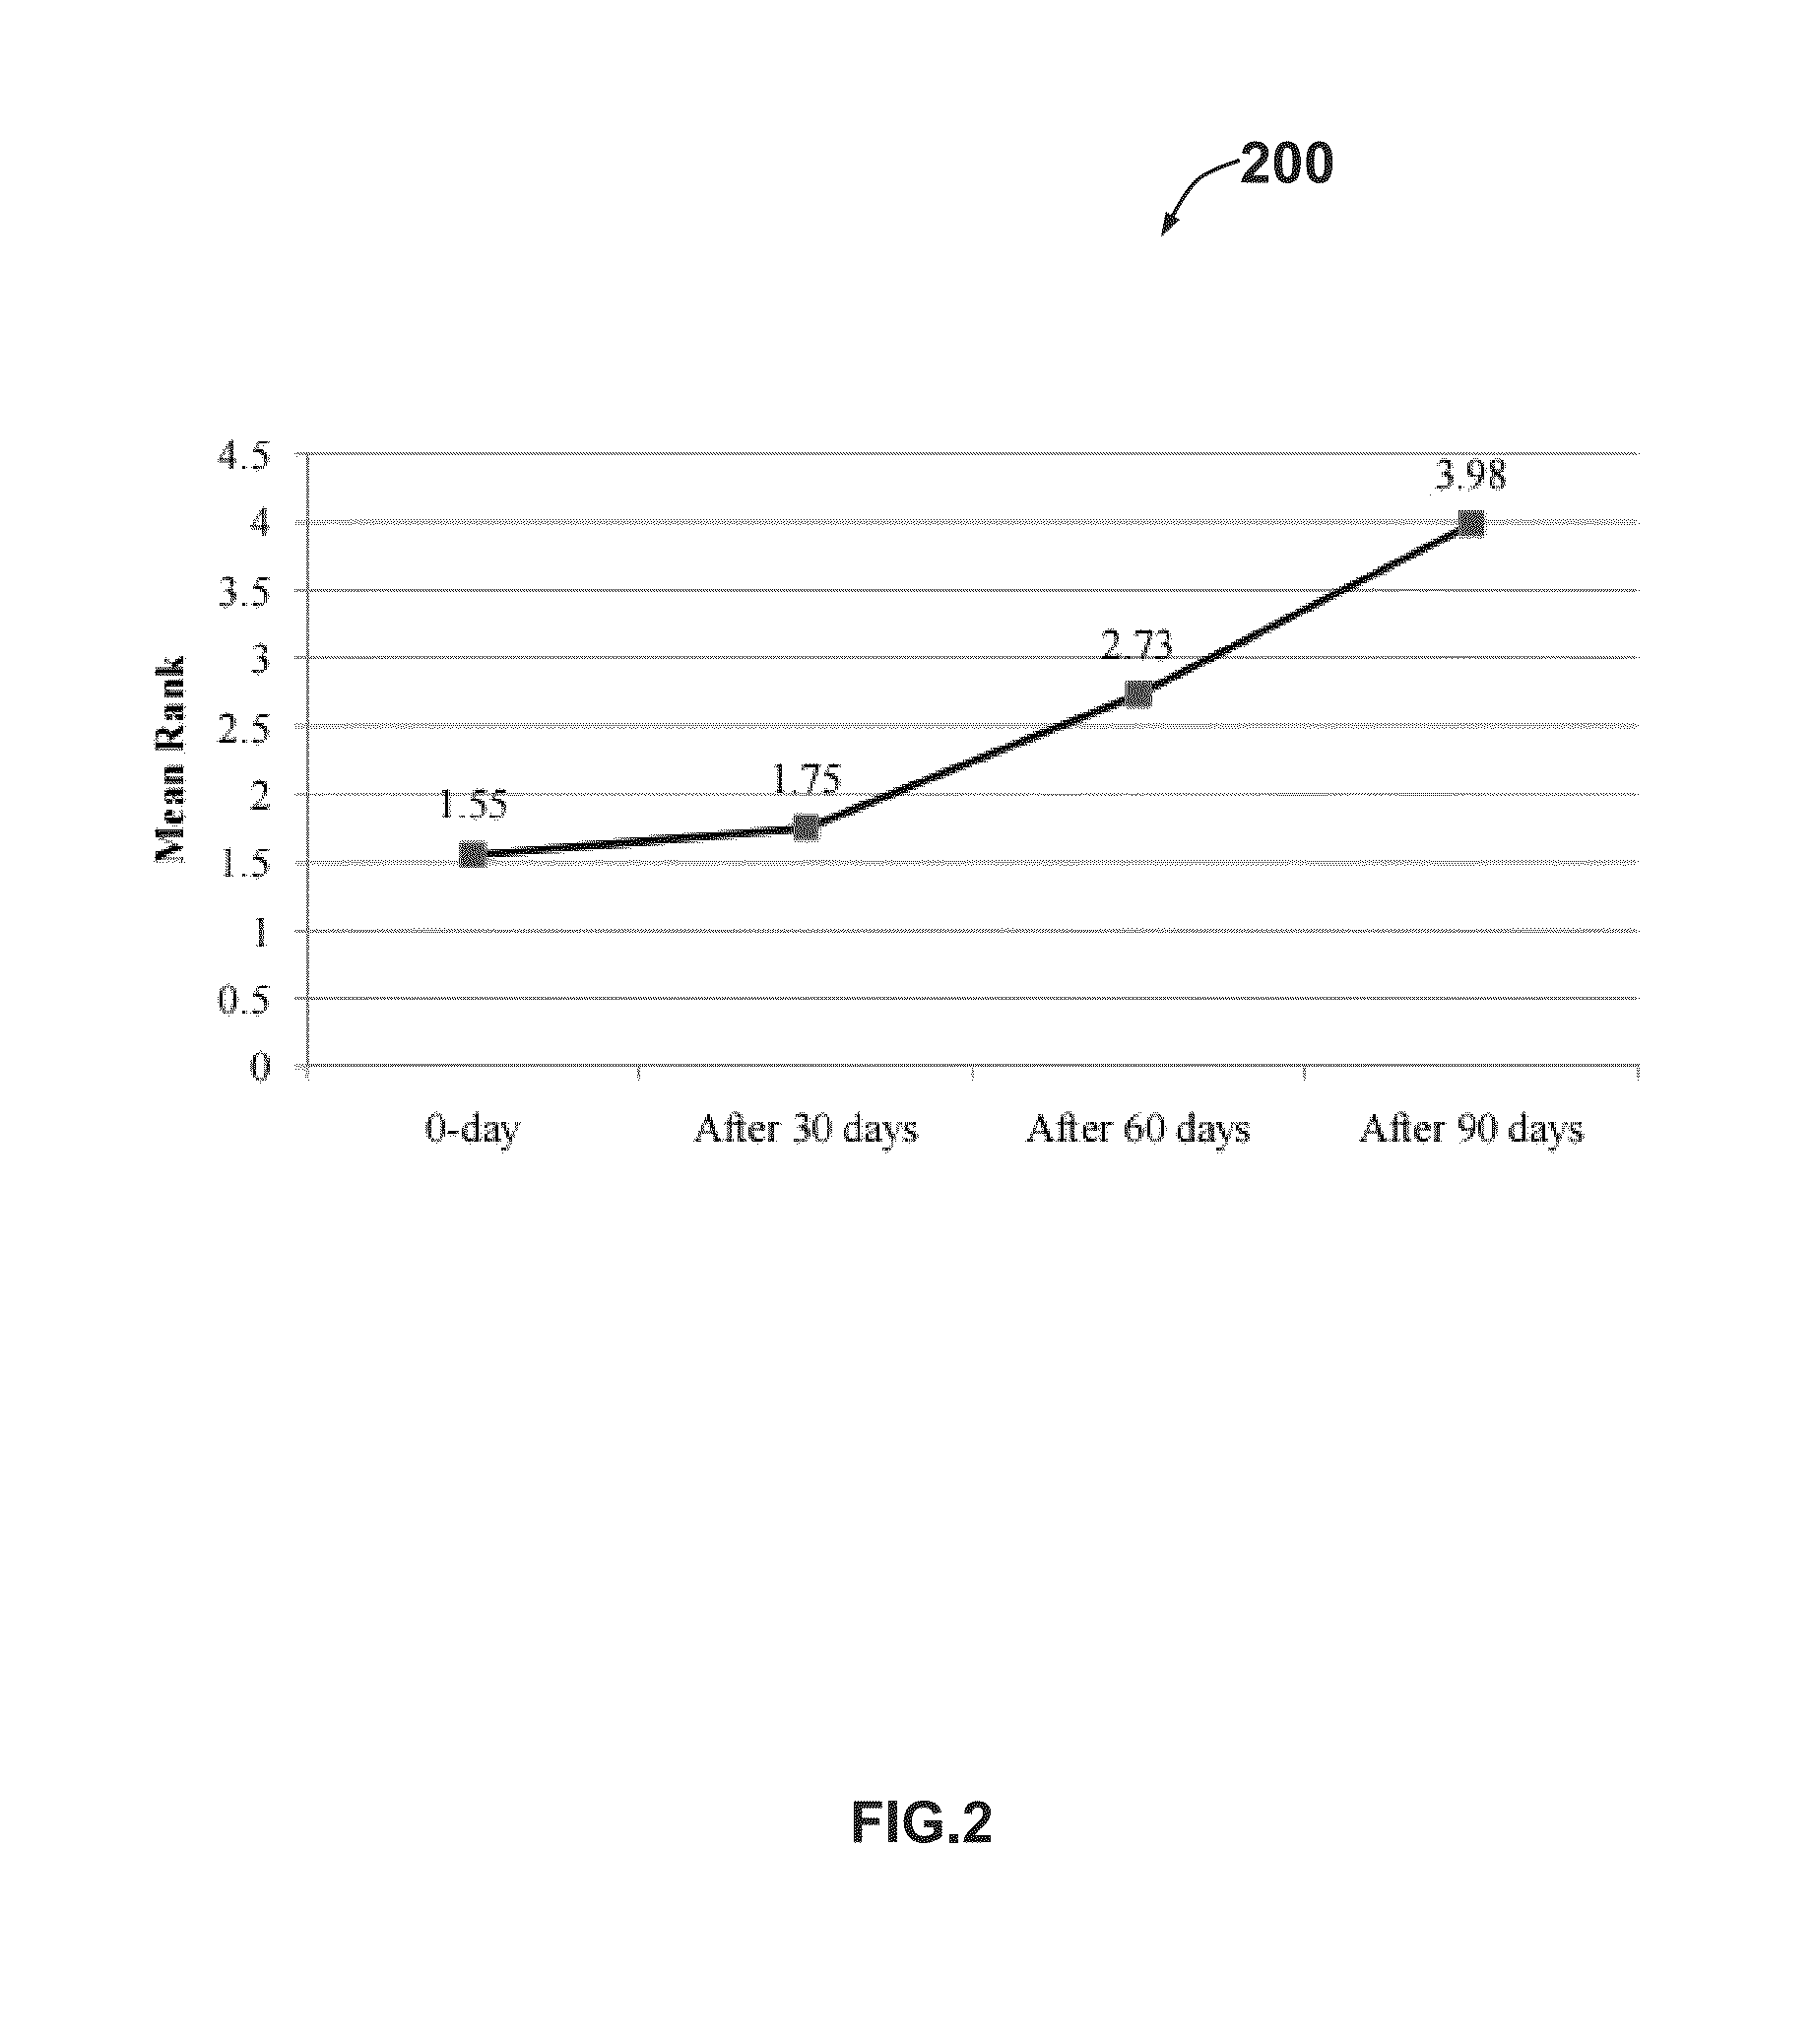 Composition of hair oil for stimulation of hair growth, control of hairfall, dandruff and infections thereof